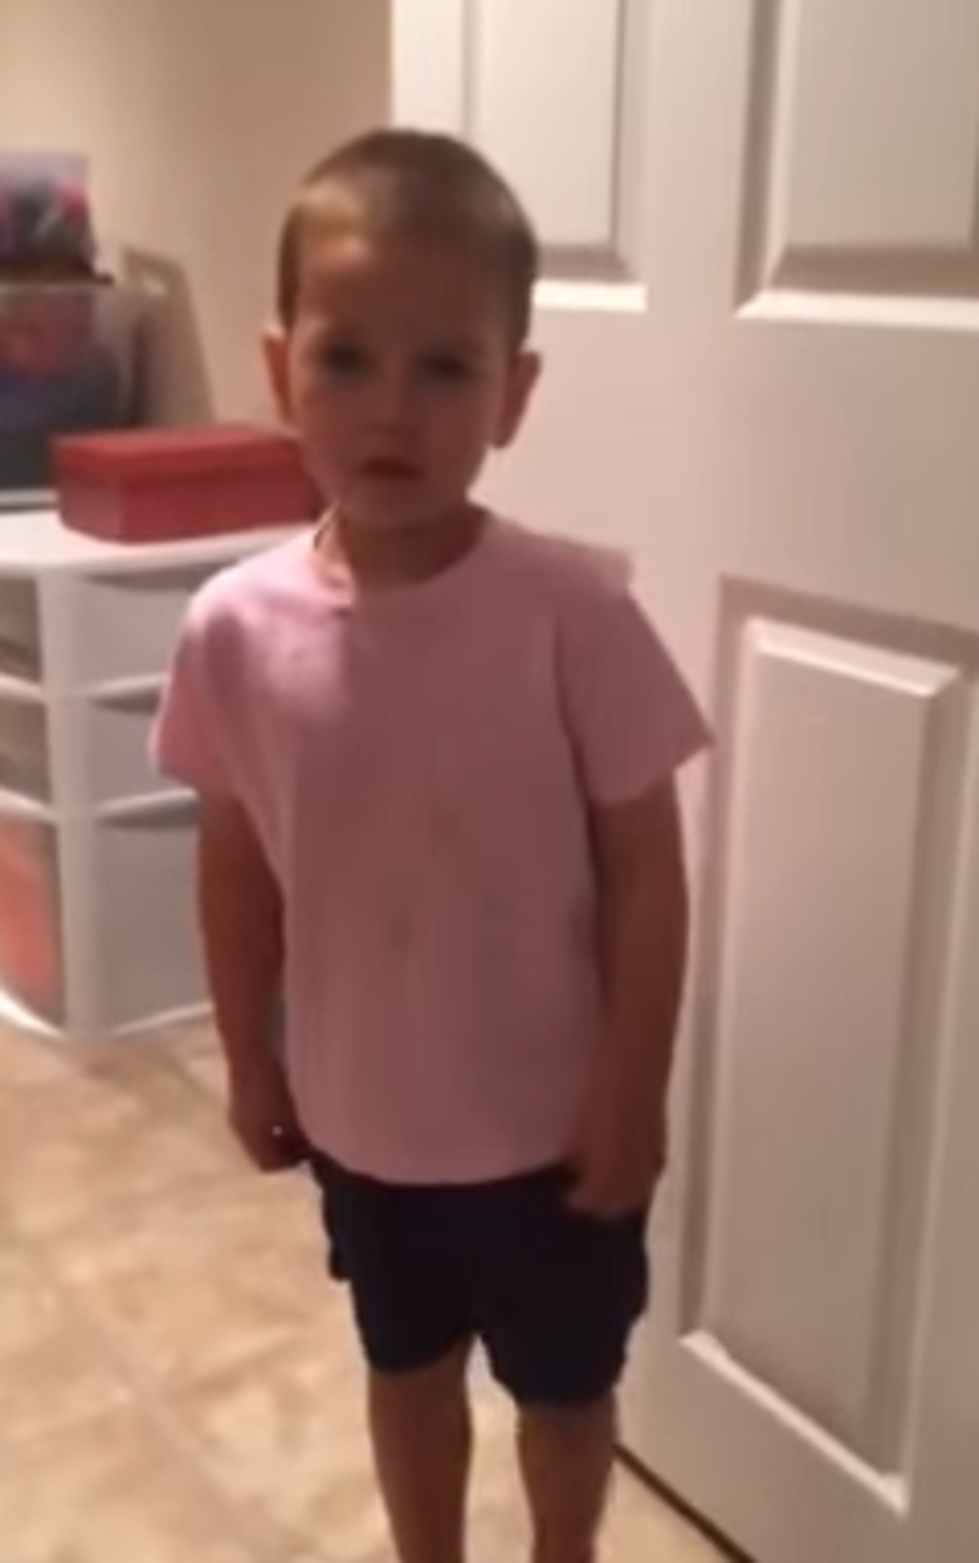 Angry Little Boy Can’t Decide If Wants To Go To Time Out Or Not [VIDEO]